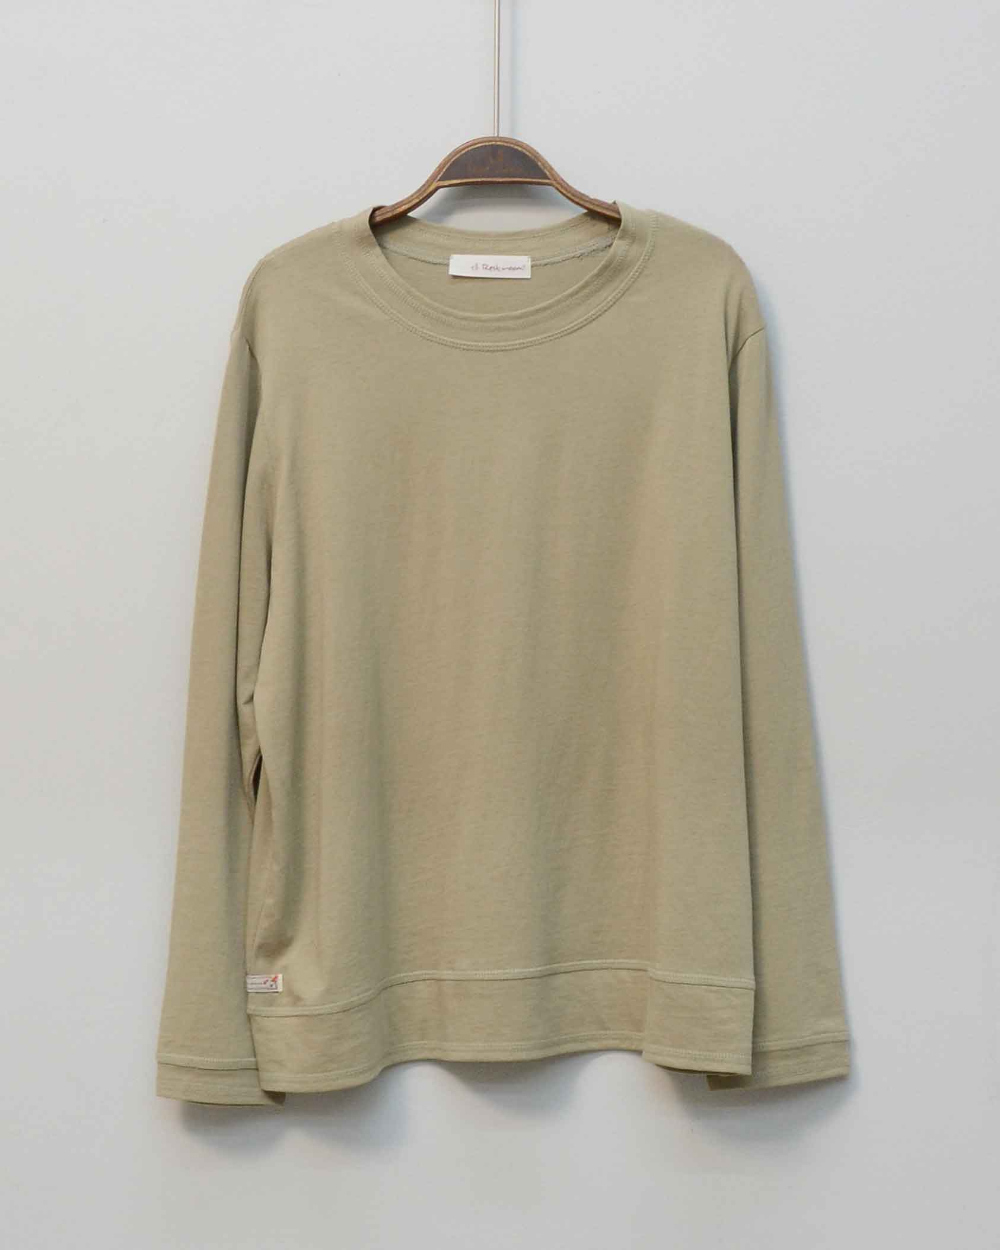 long sleeved tee cream color image-S4L25